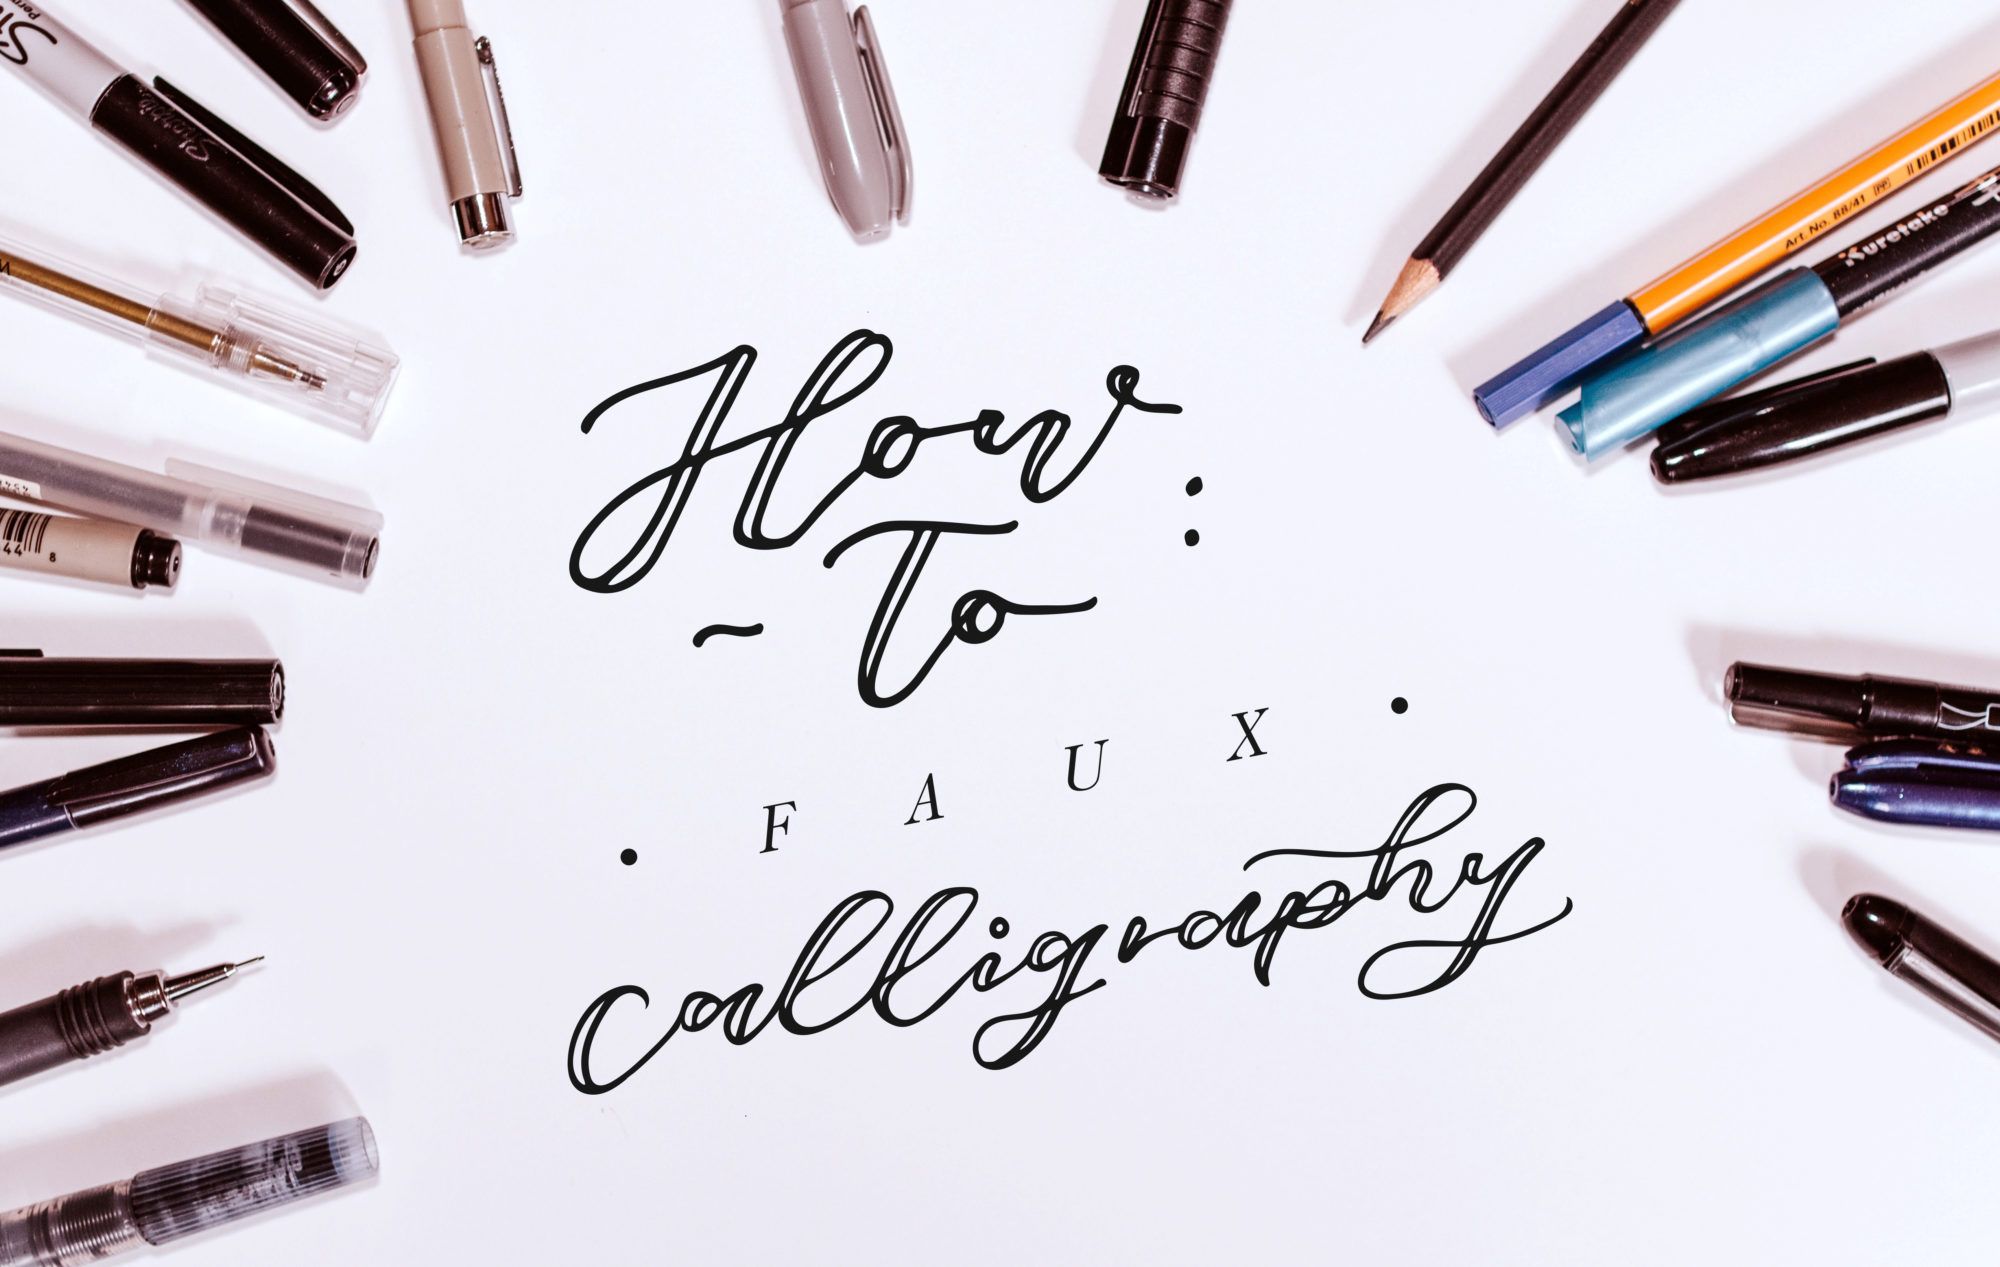 Faux Calligraphy - A turorial with interesting words with The Painted Pen